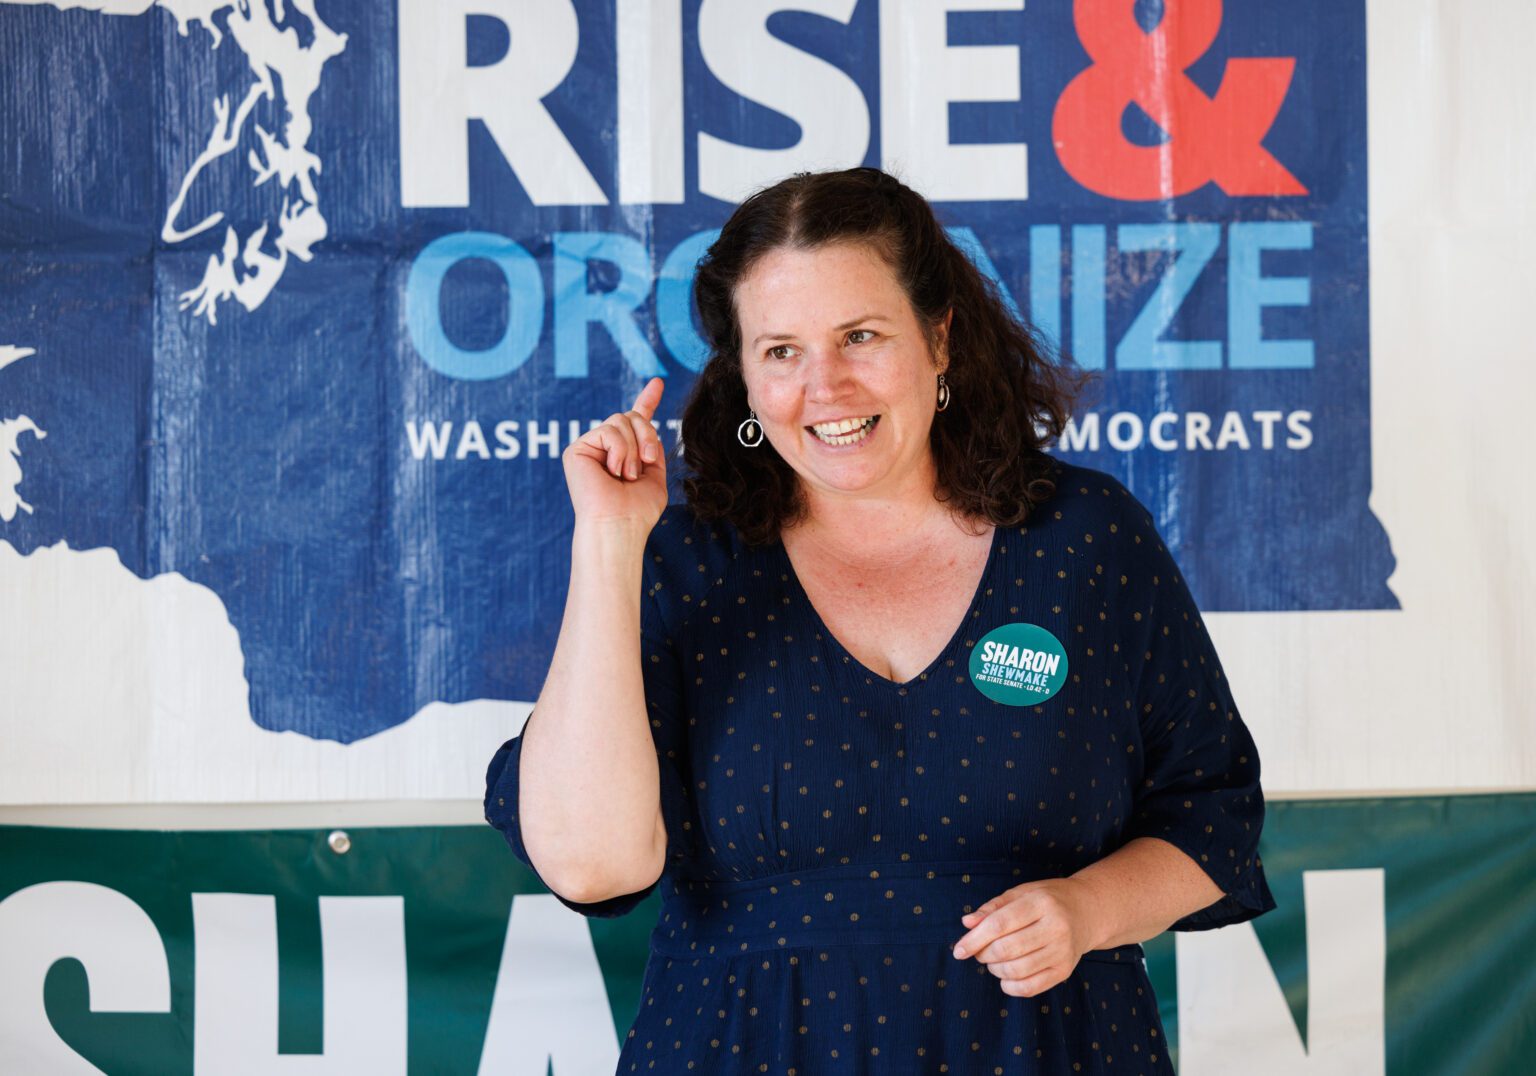 Washington state Senate candidate Sharon Shewmake talks to supporters in Bellingham before knocking on doors to get out the vote on July 27. Two conservative political action committees have targeted Shewmake with more than $184